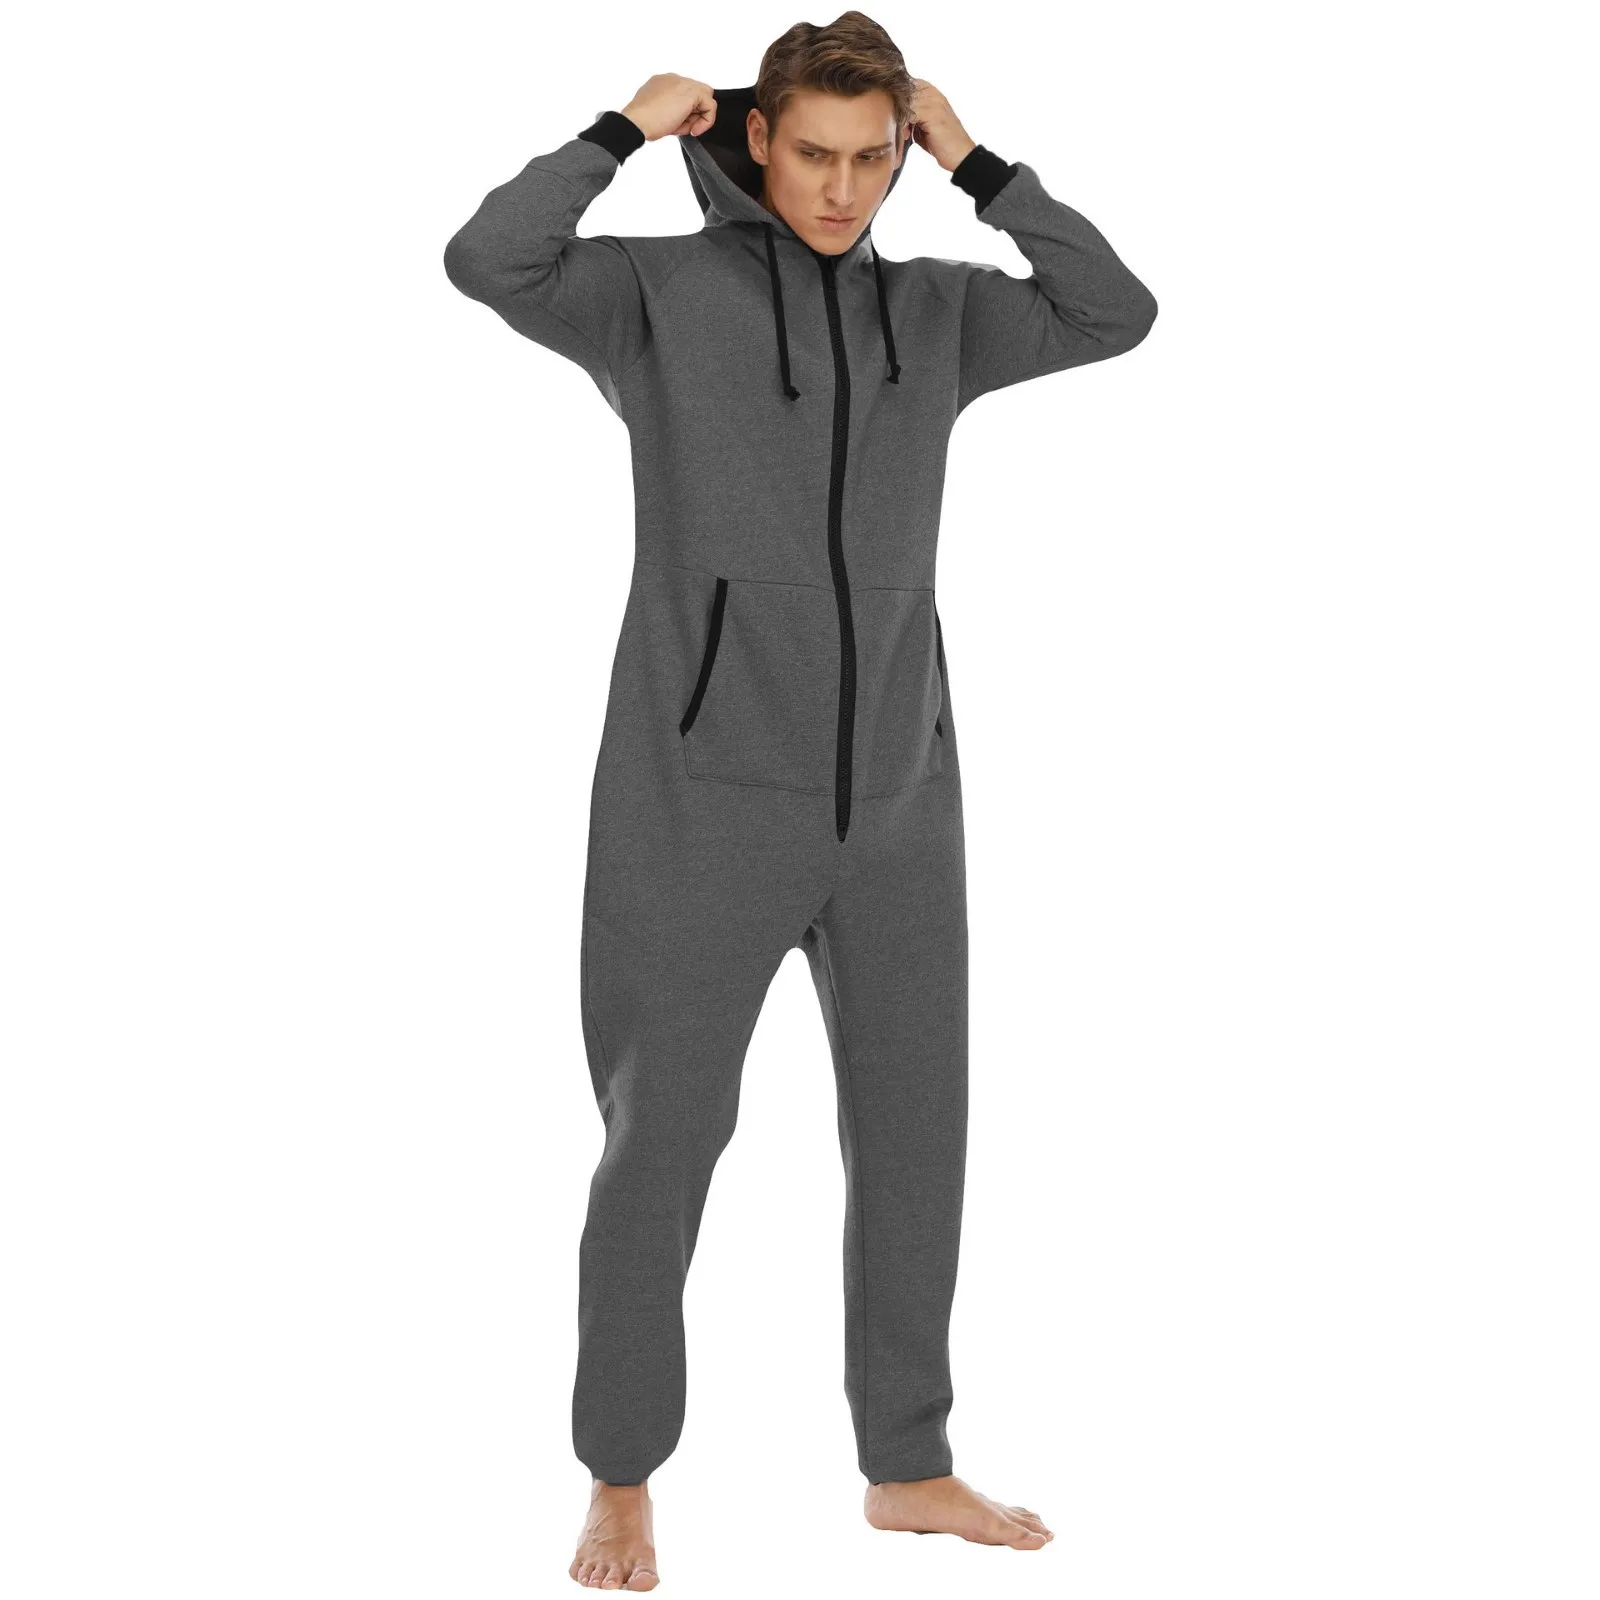 

Mens Solid Color Onesies Homewear Zip Up Hooded Oversized Jumpsuit Spring Autumn Sleepwear Playsuits Overalls Male Loungewear